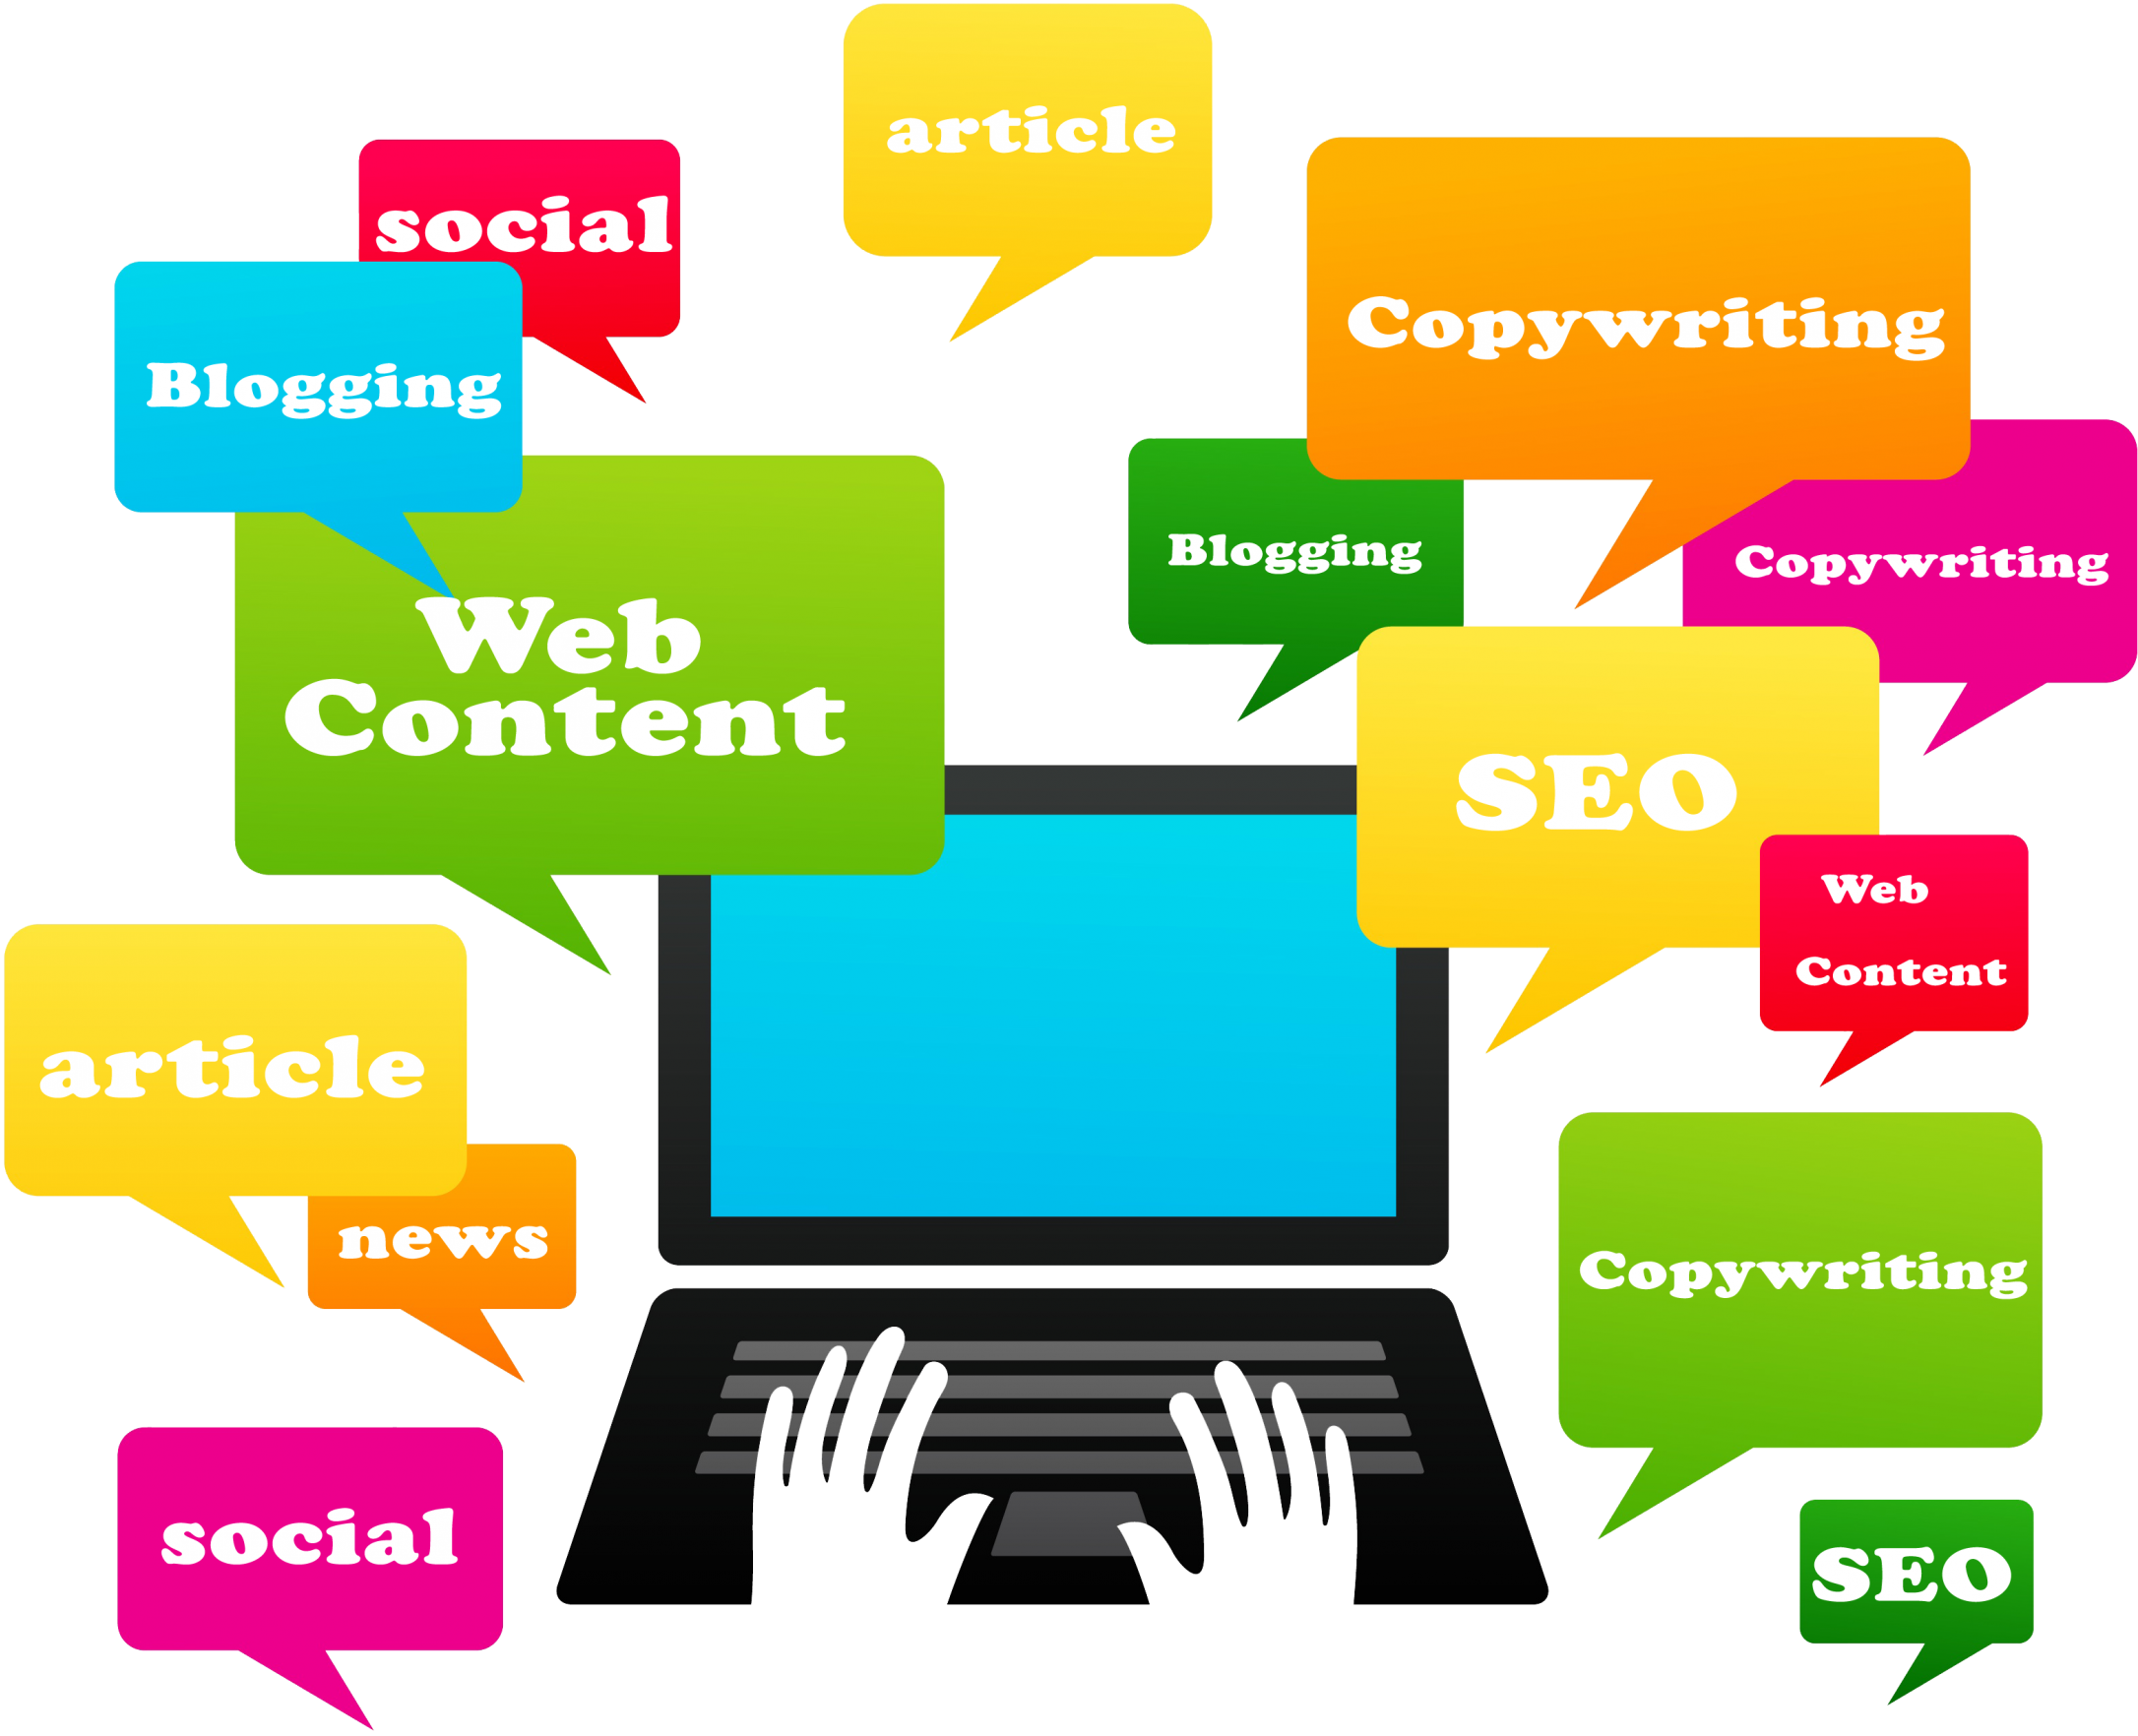 We are Best Digital Marketing Company In Kolkata WB - India, we strive to offer our clients with the most effective and result-oriented search engine optimization (SEO) services in Kolkata WB.